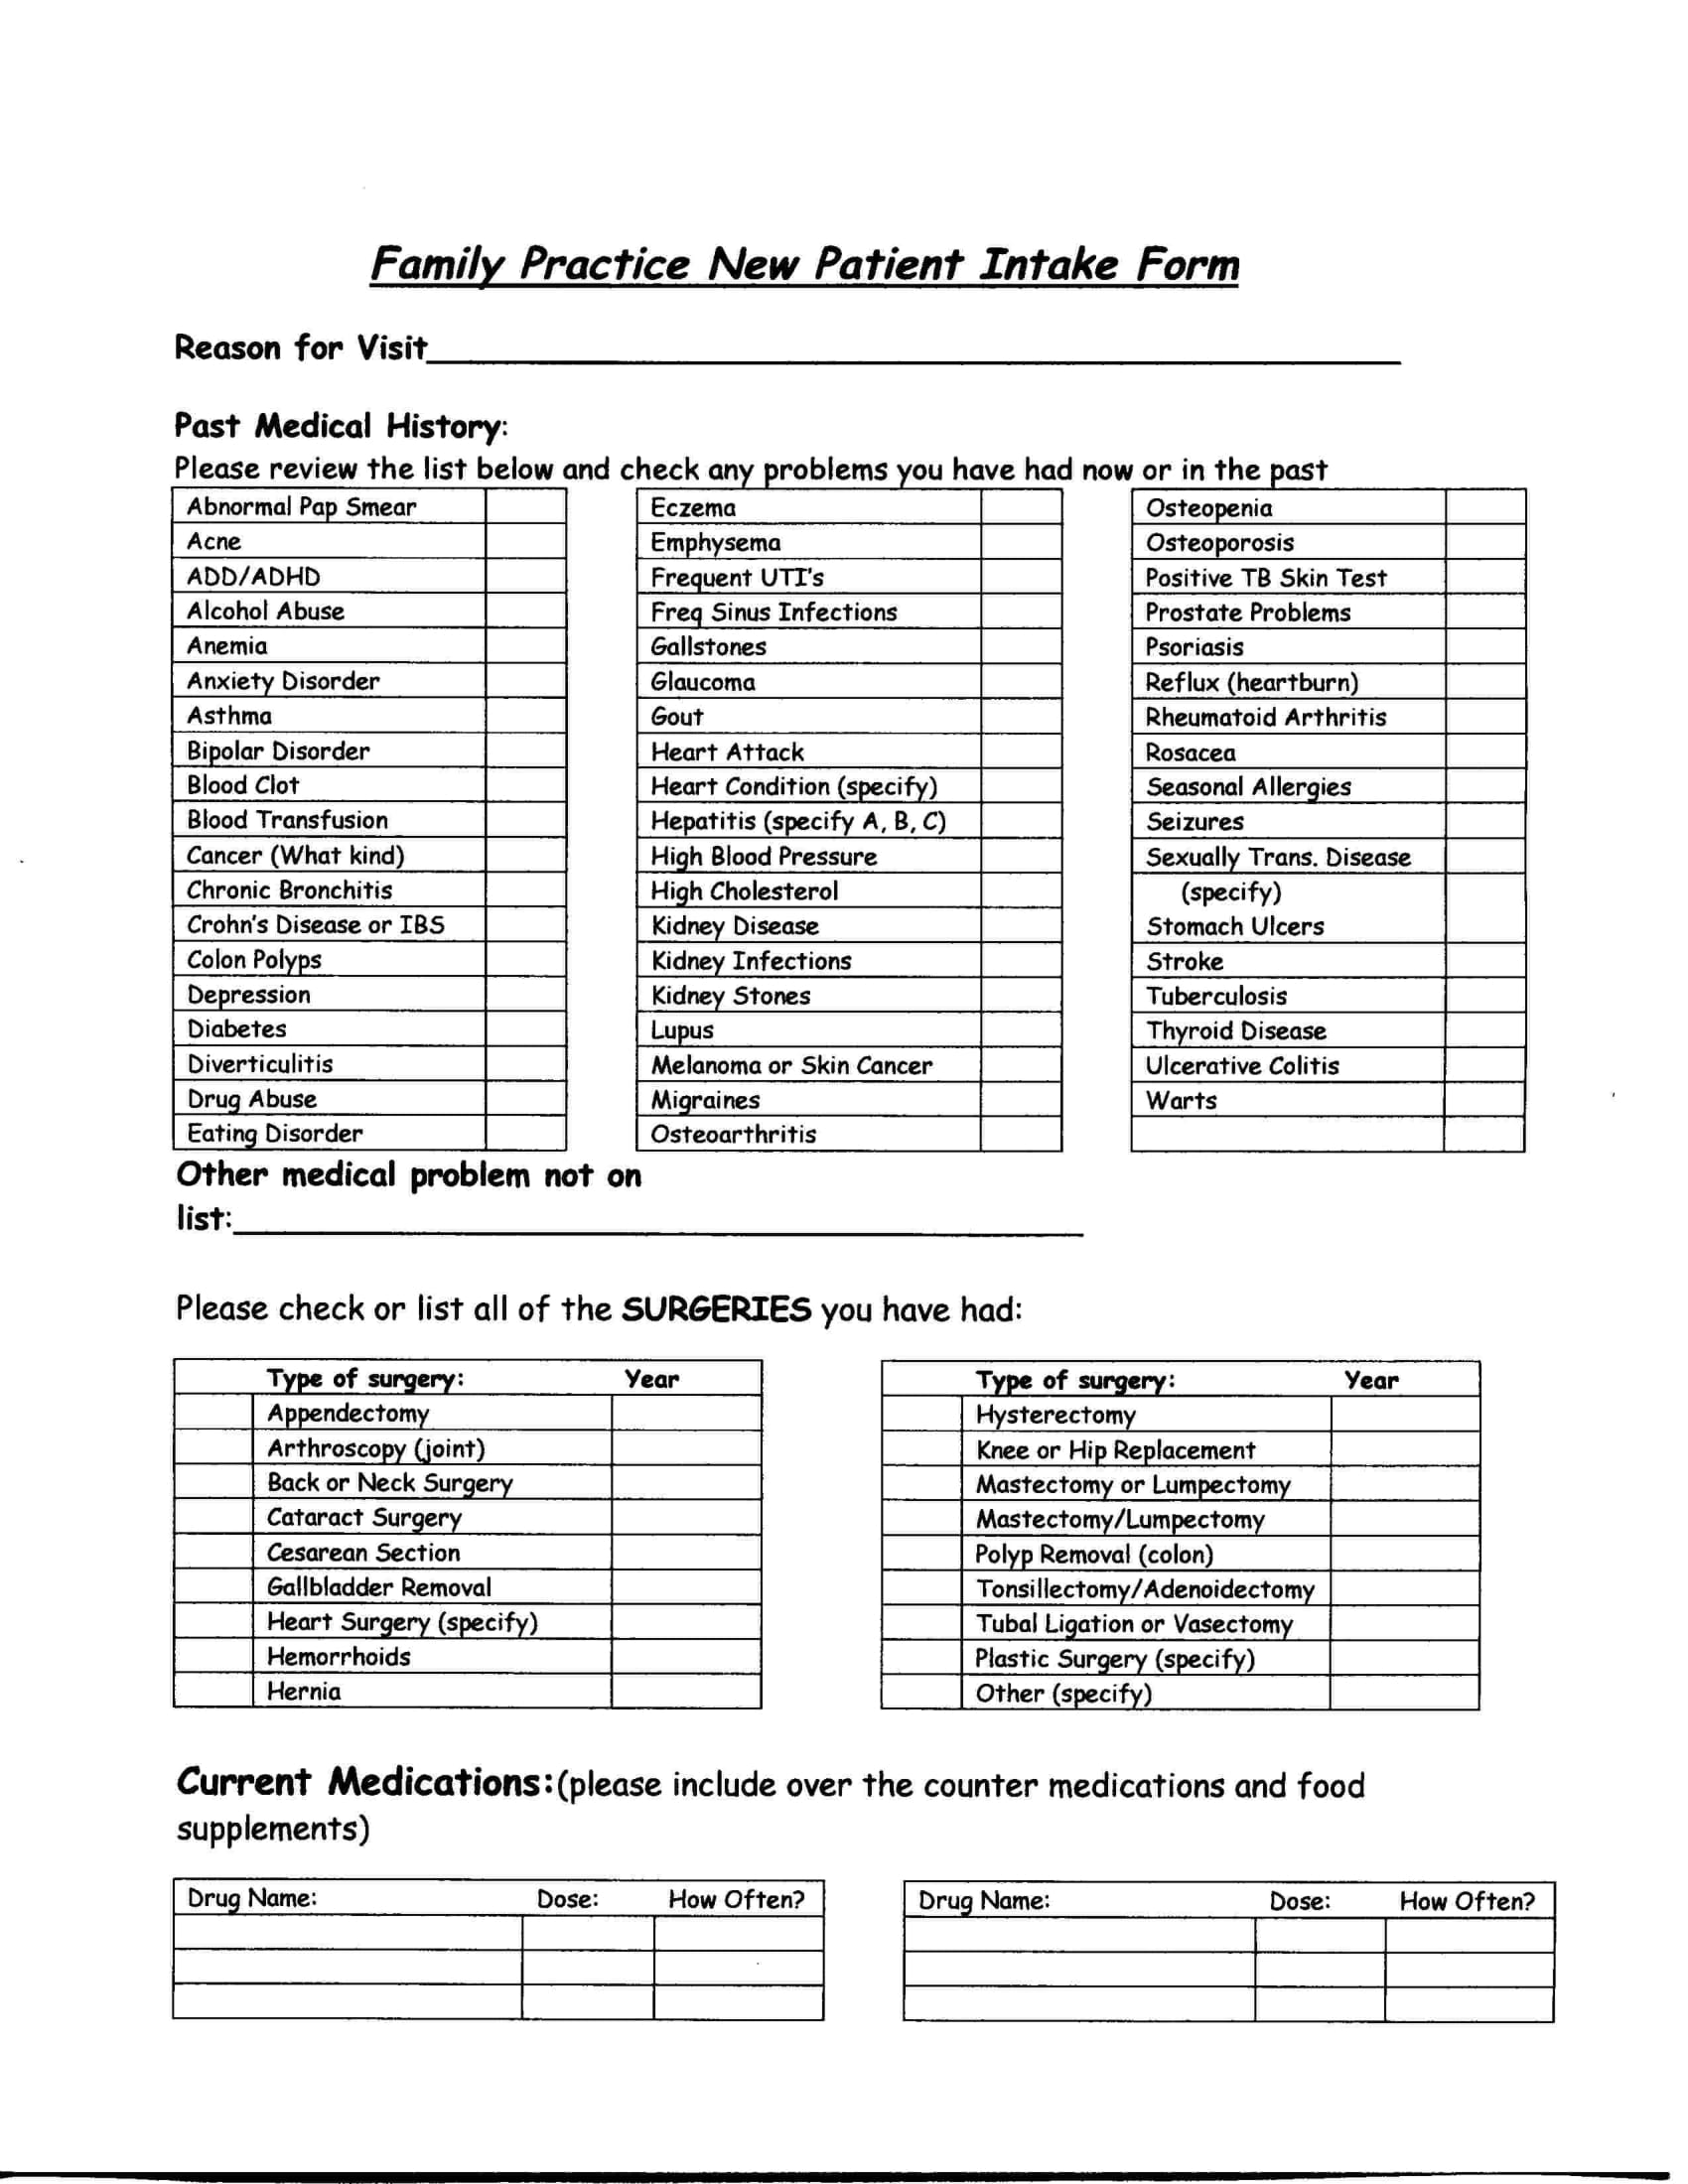 family practice new patient intake form 1